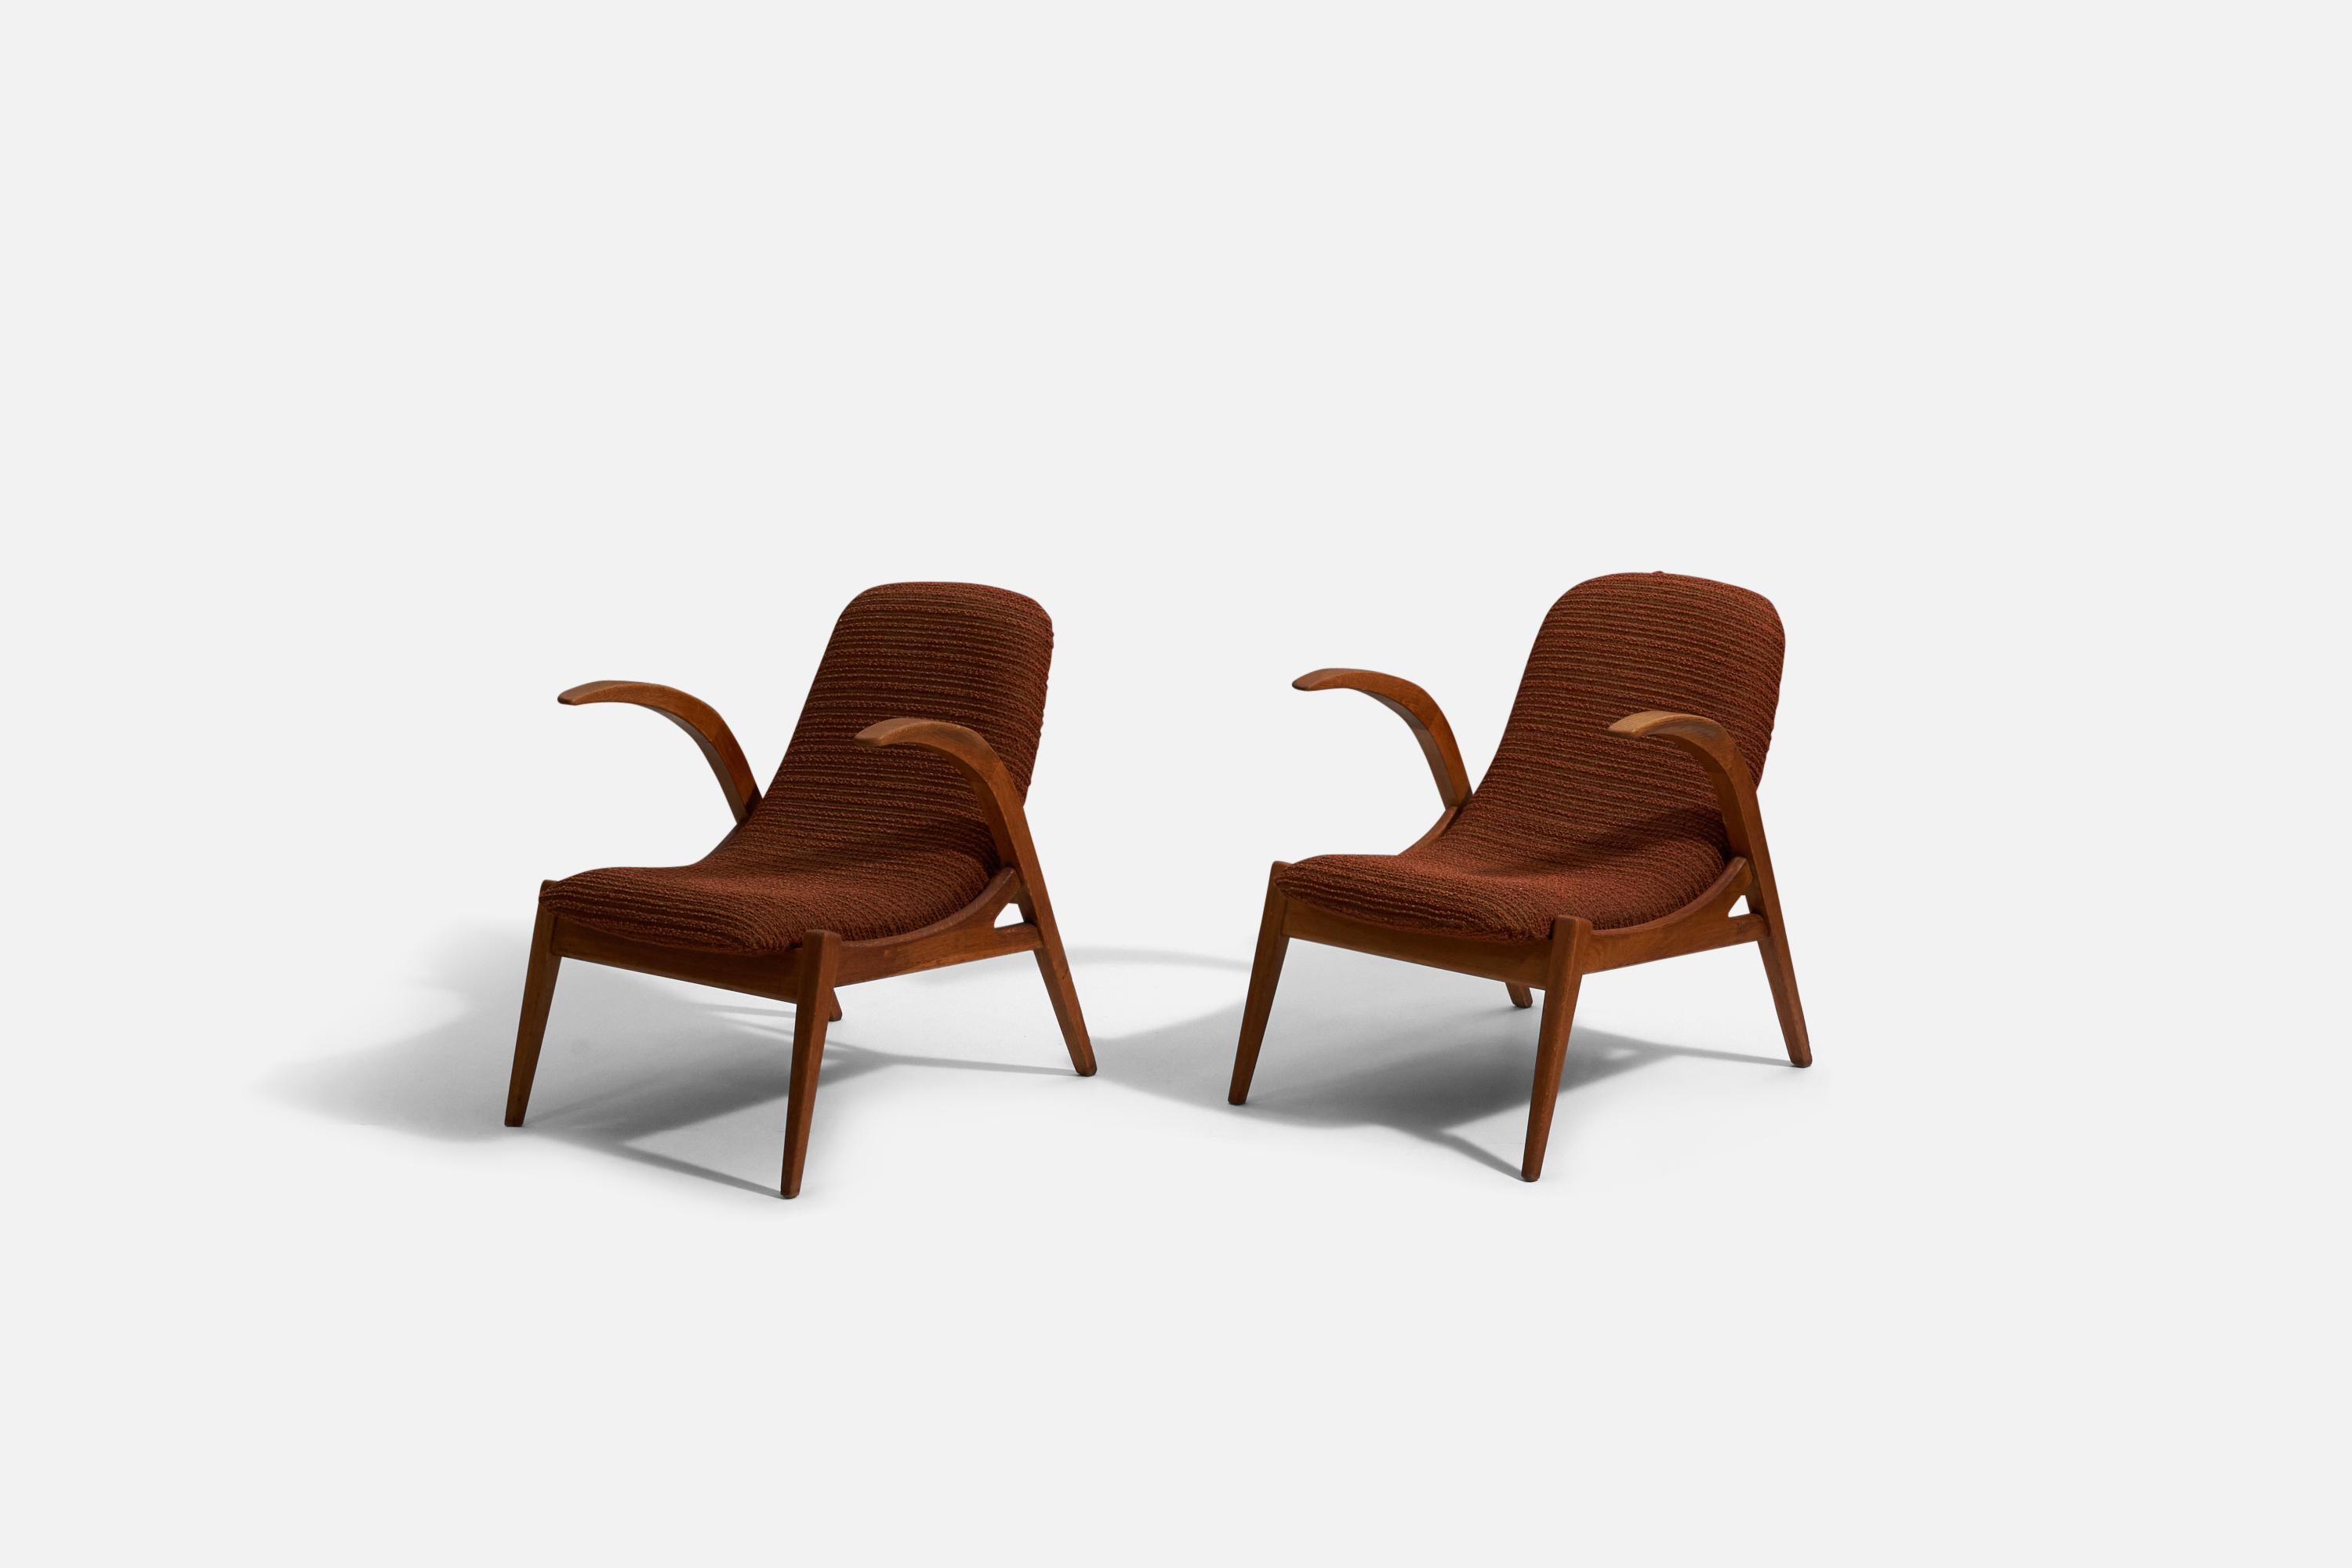 A pair of lounge chairs in wood and red fabric designed by Jan Vanek, produced by Krásná Jizba, Czech Republic, 1960s.